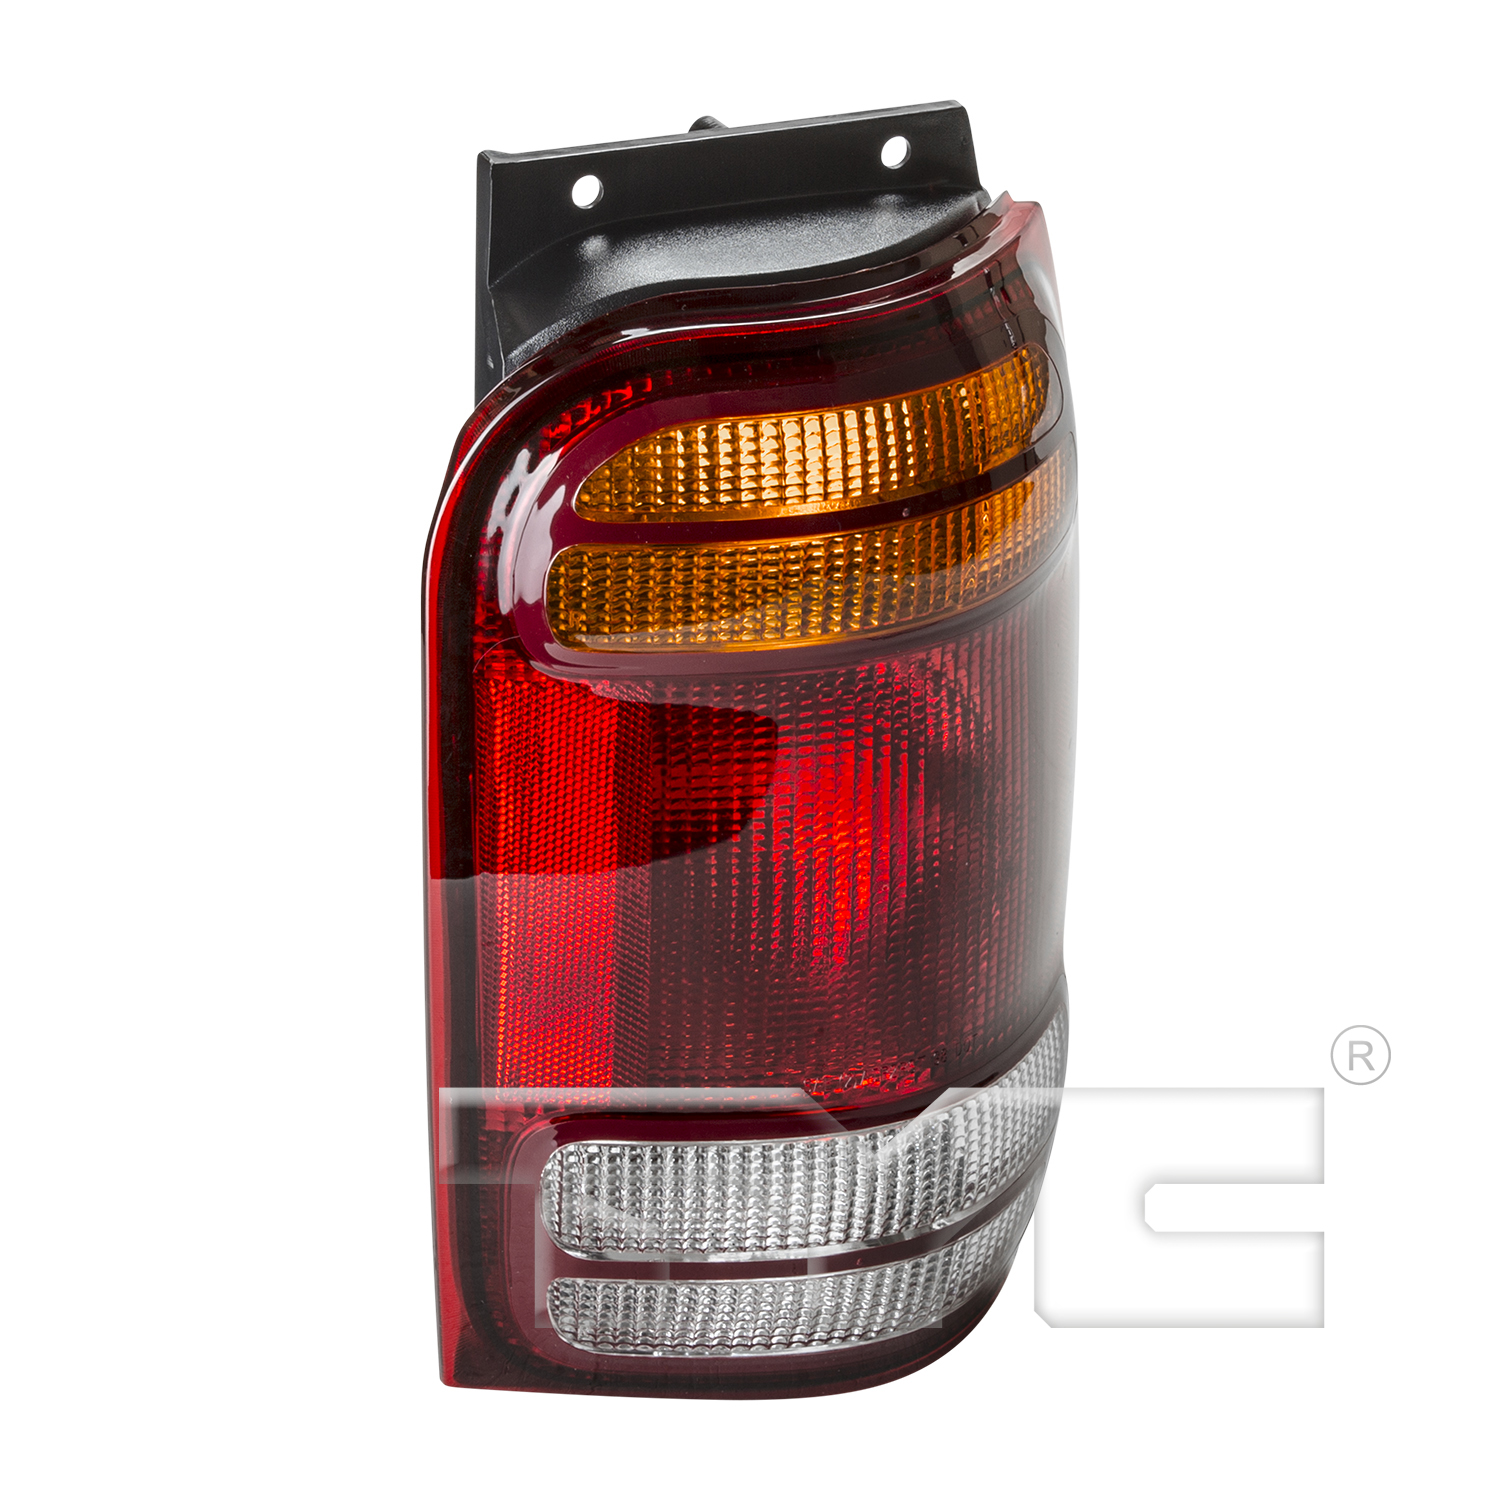 Aftermarket TAILLIGHTS for MERCURY - MOUNTAINEER, MOUNTAINEER,98-01,RT Taillamp assy